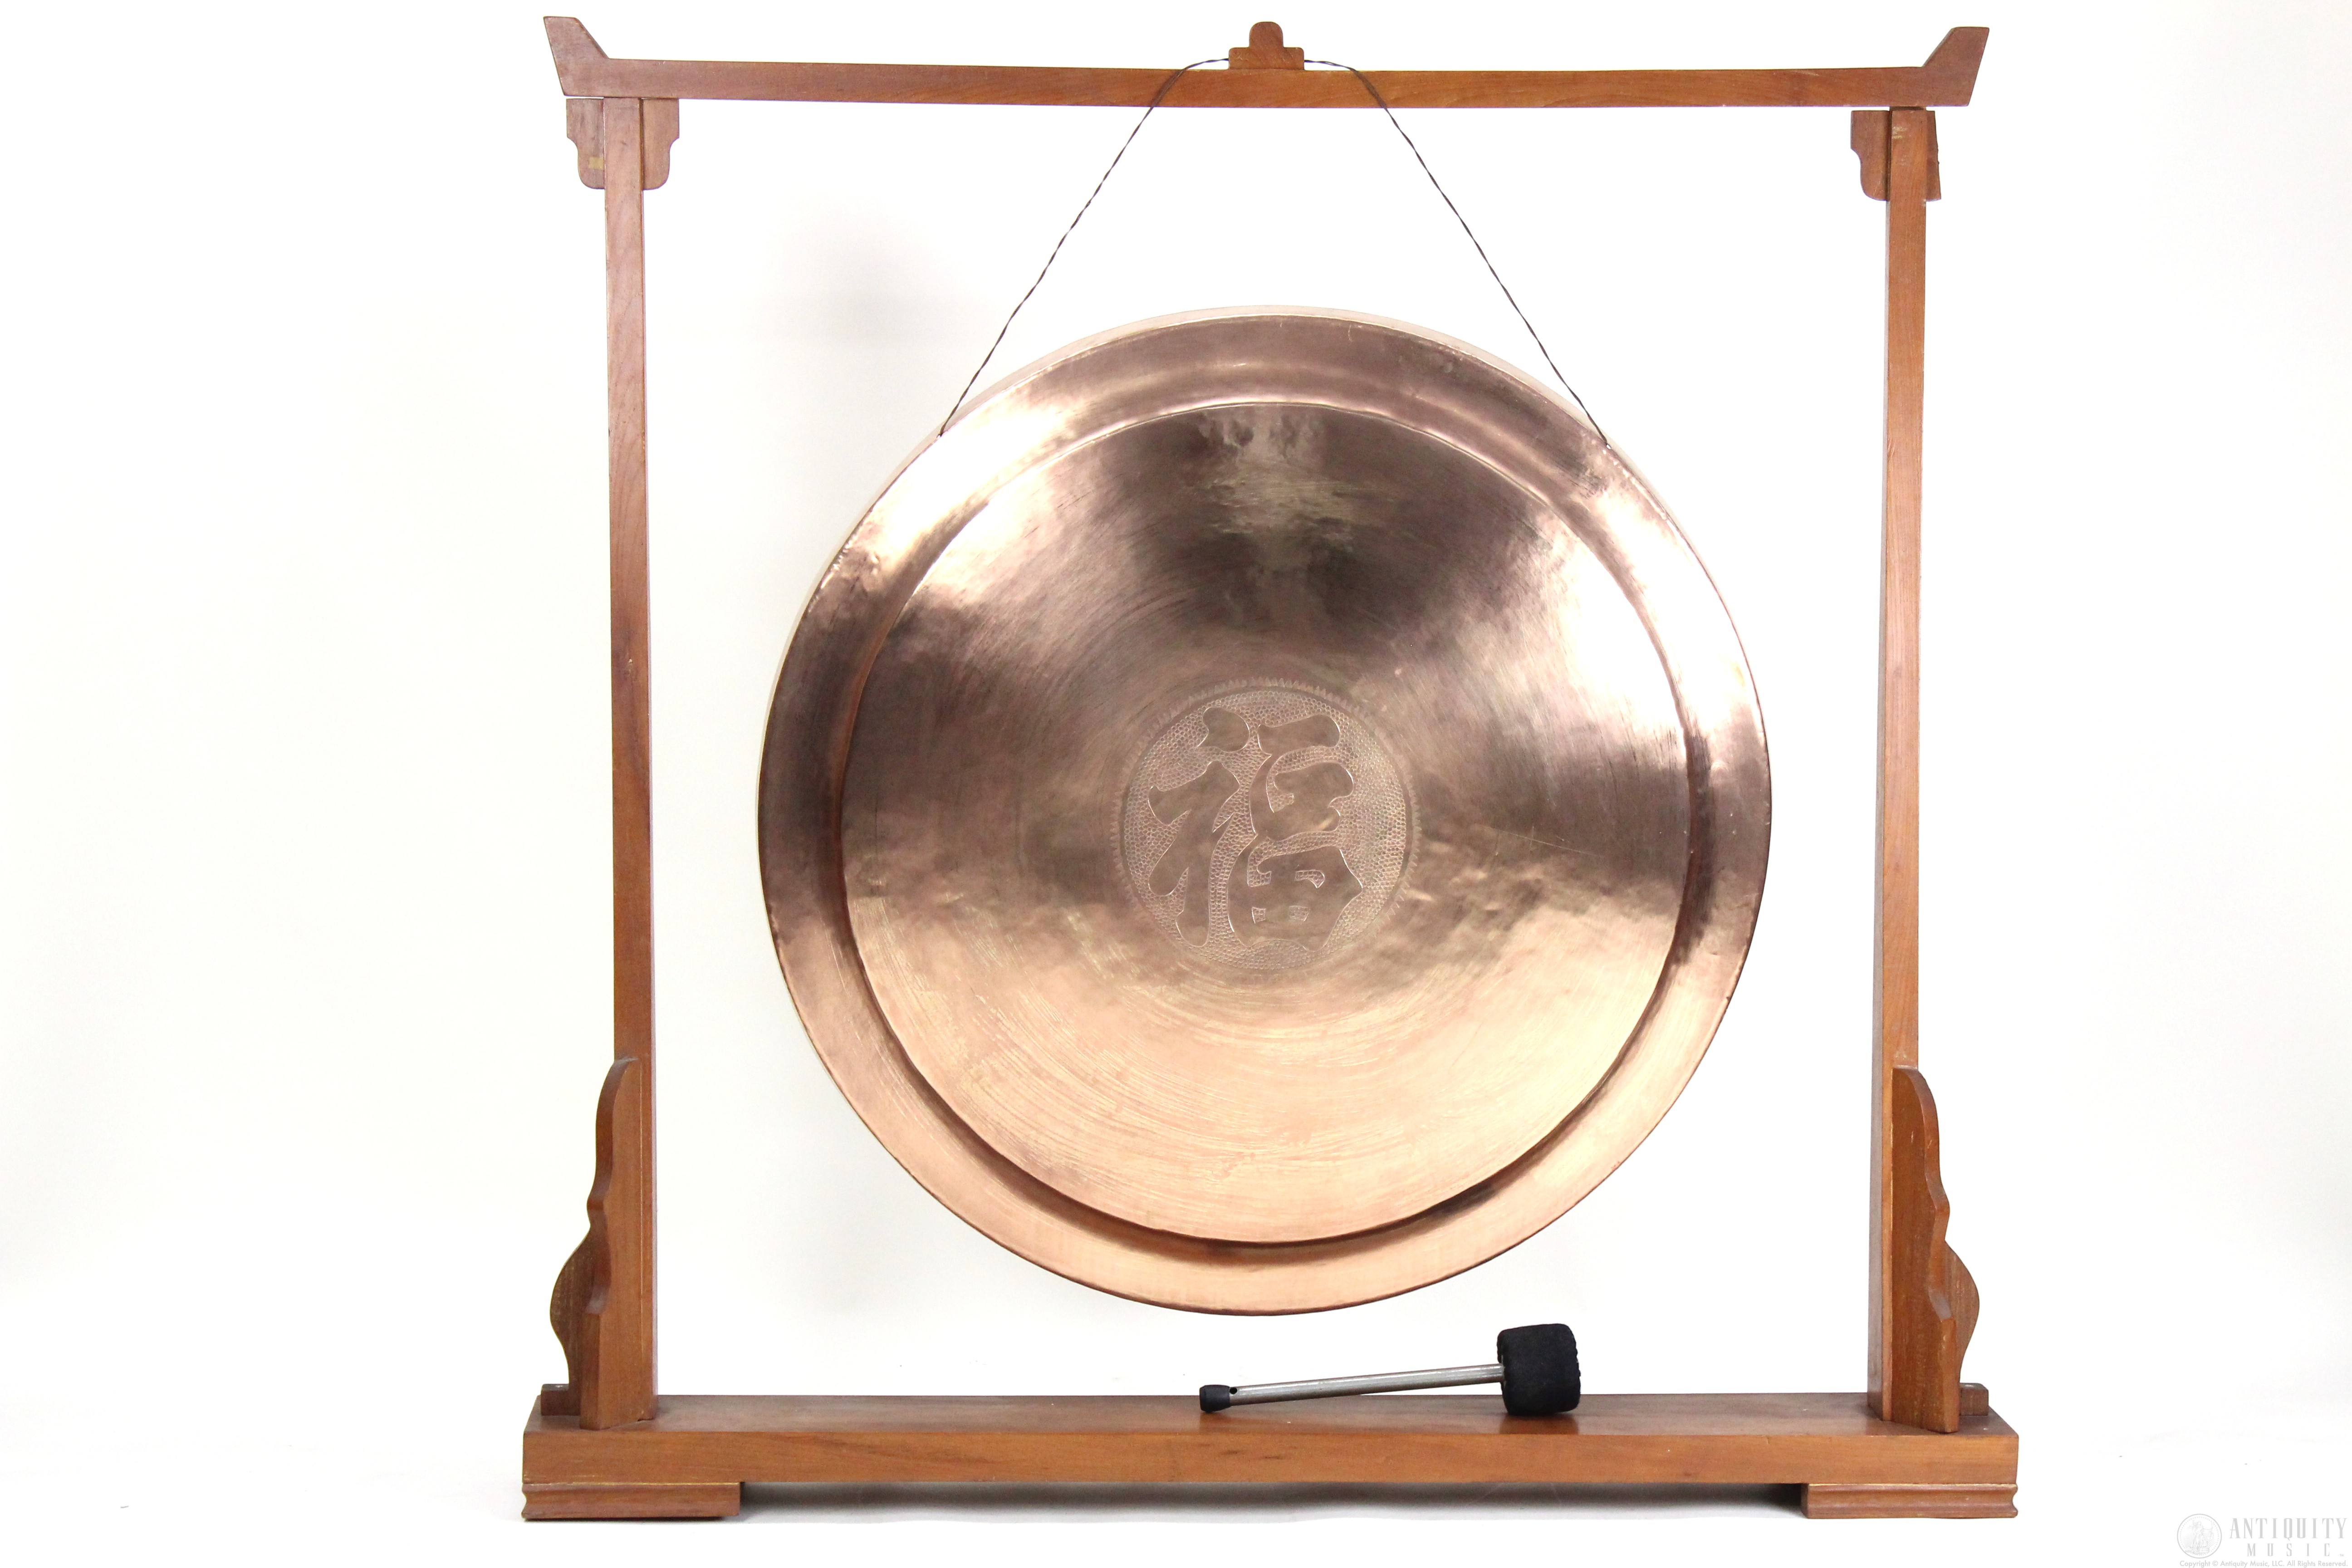 40 Symphonic Gong 40 inch Chau Gong and Stand Gongs Drums Percussion